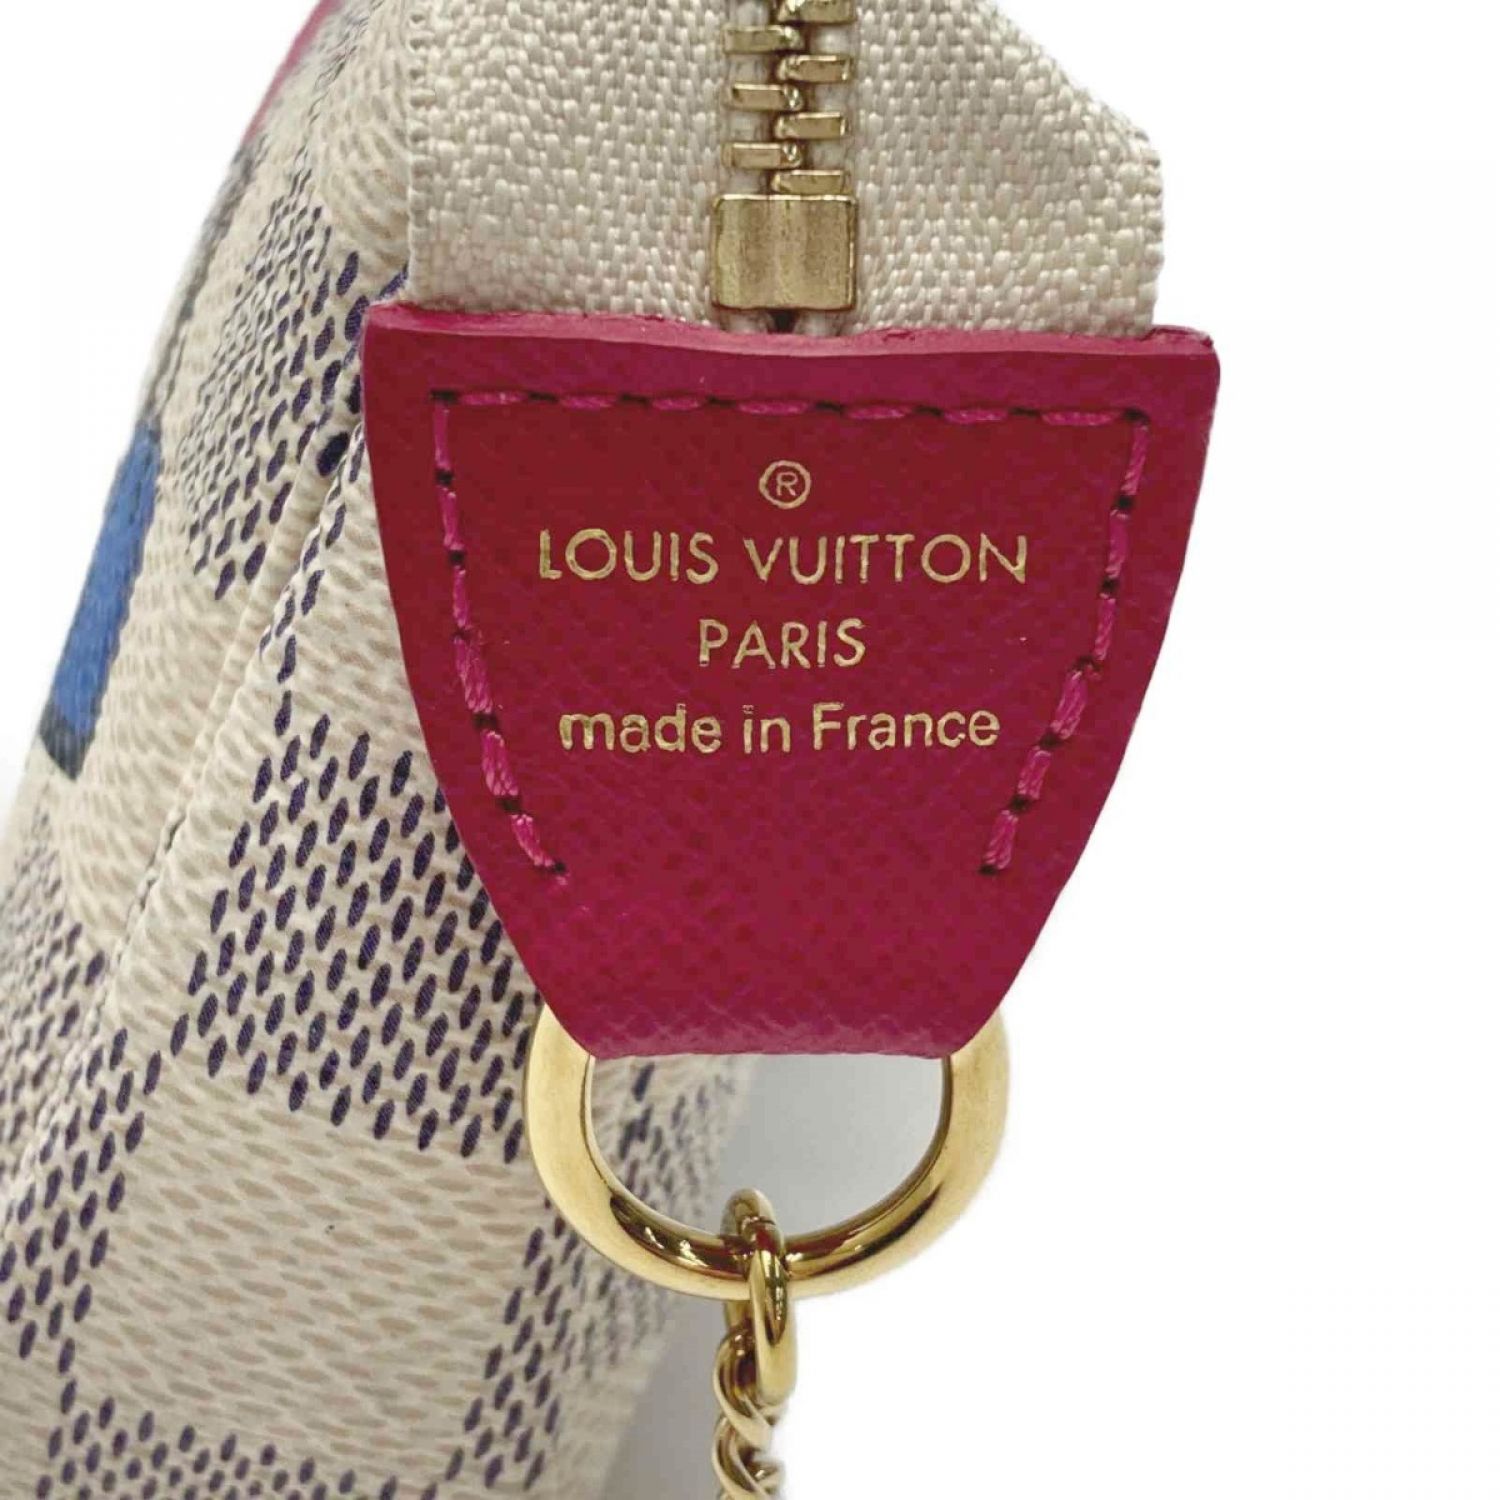 LOUIS VUITTON ルイヴィトン ダミエ アズール ミニ ポシェット アクセ ...